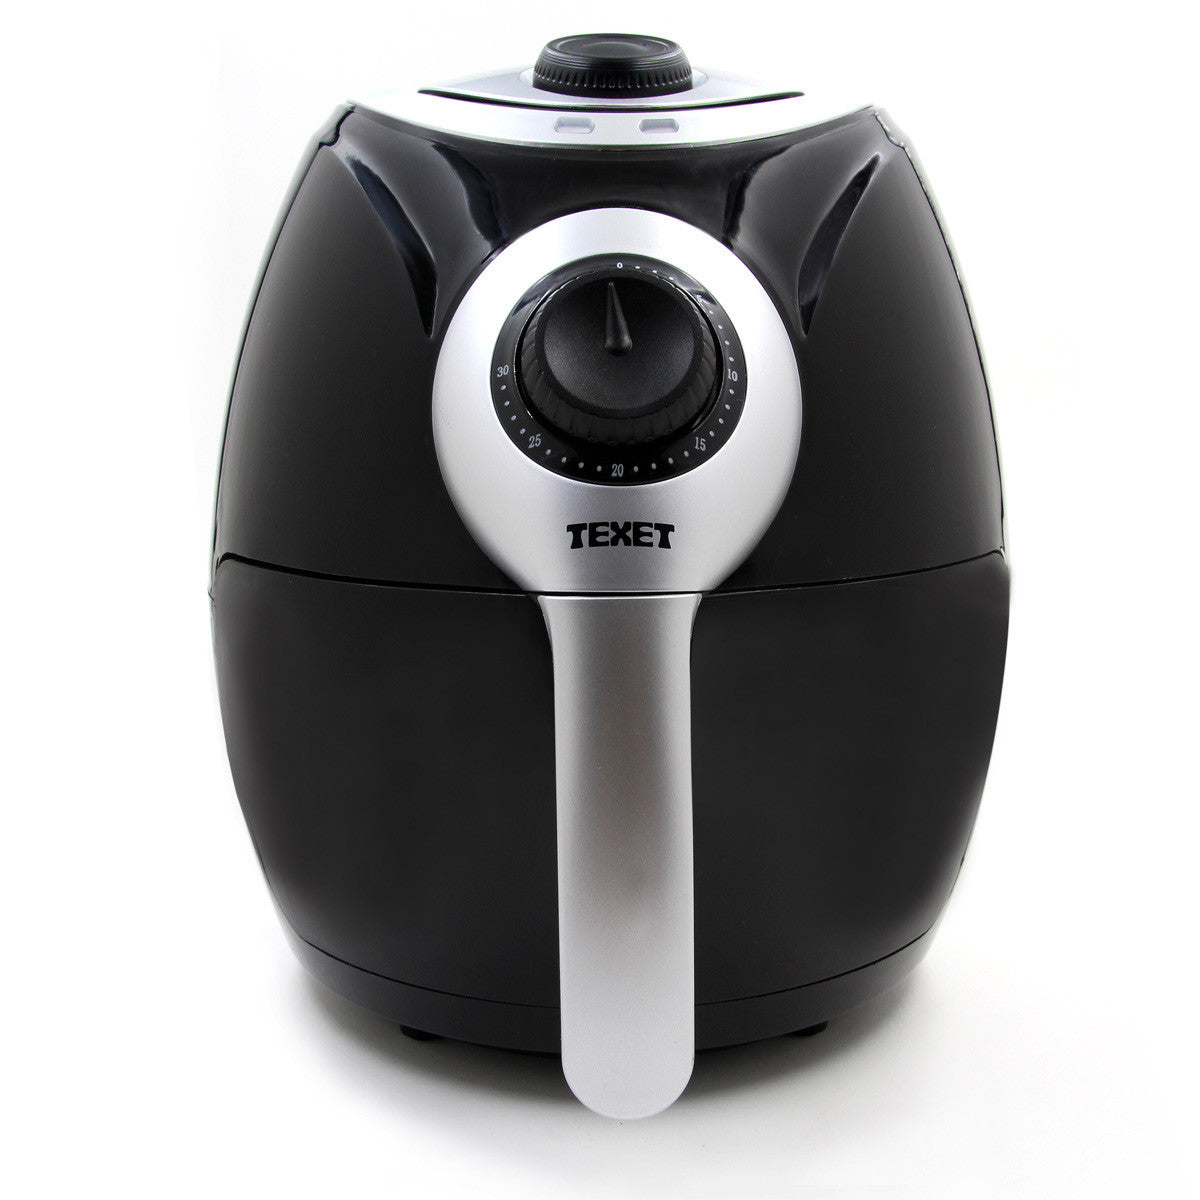 TEXET 2.8 L Air Fryer with Advanced Rapid Air Flow Technology